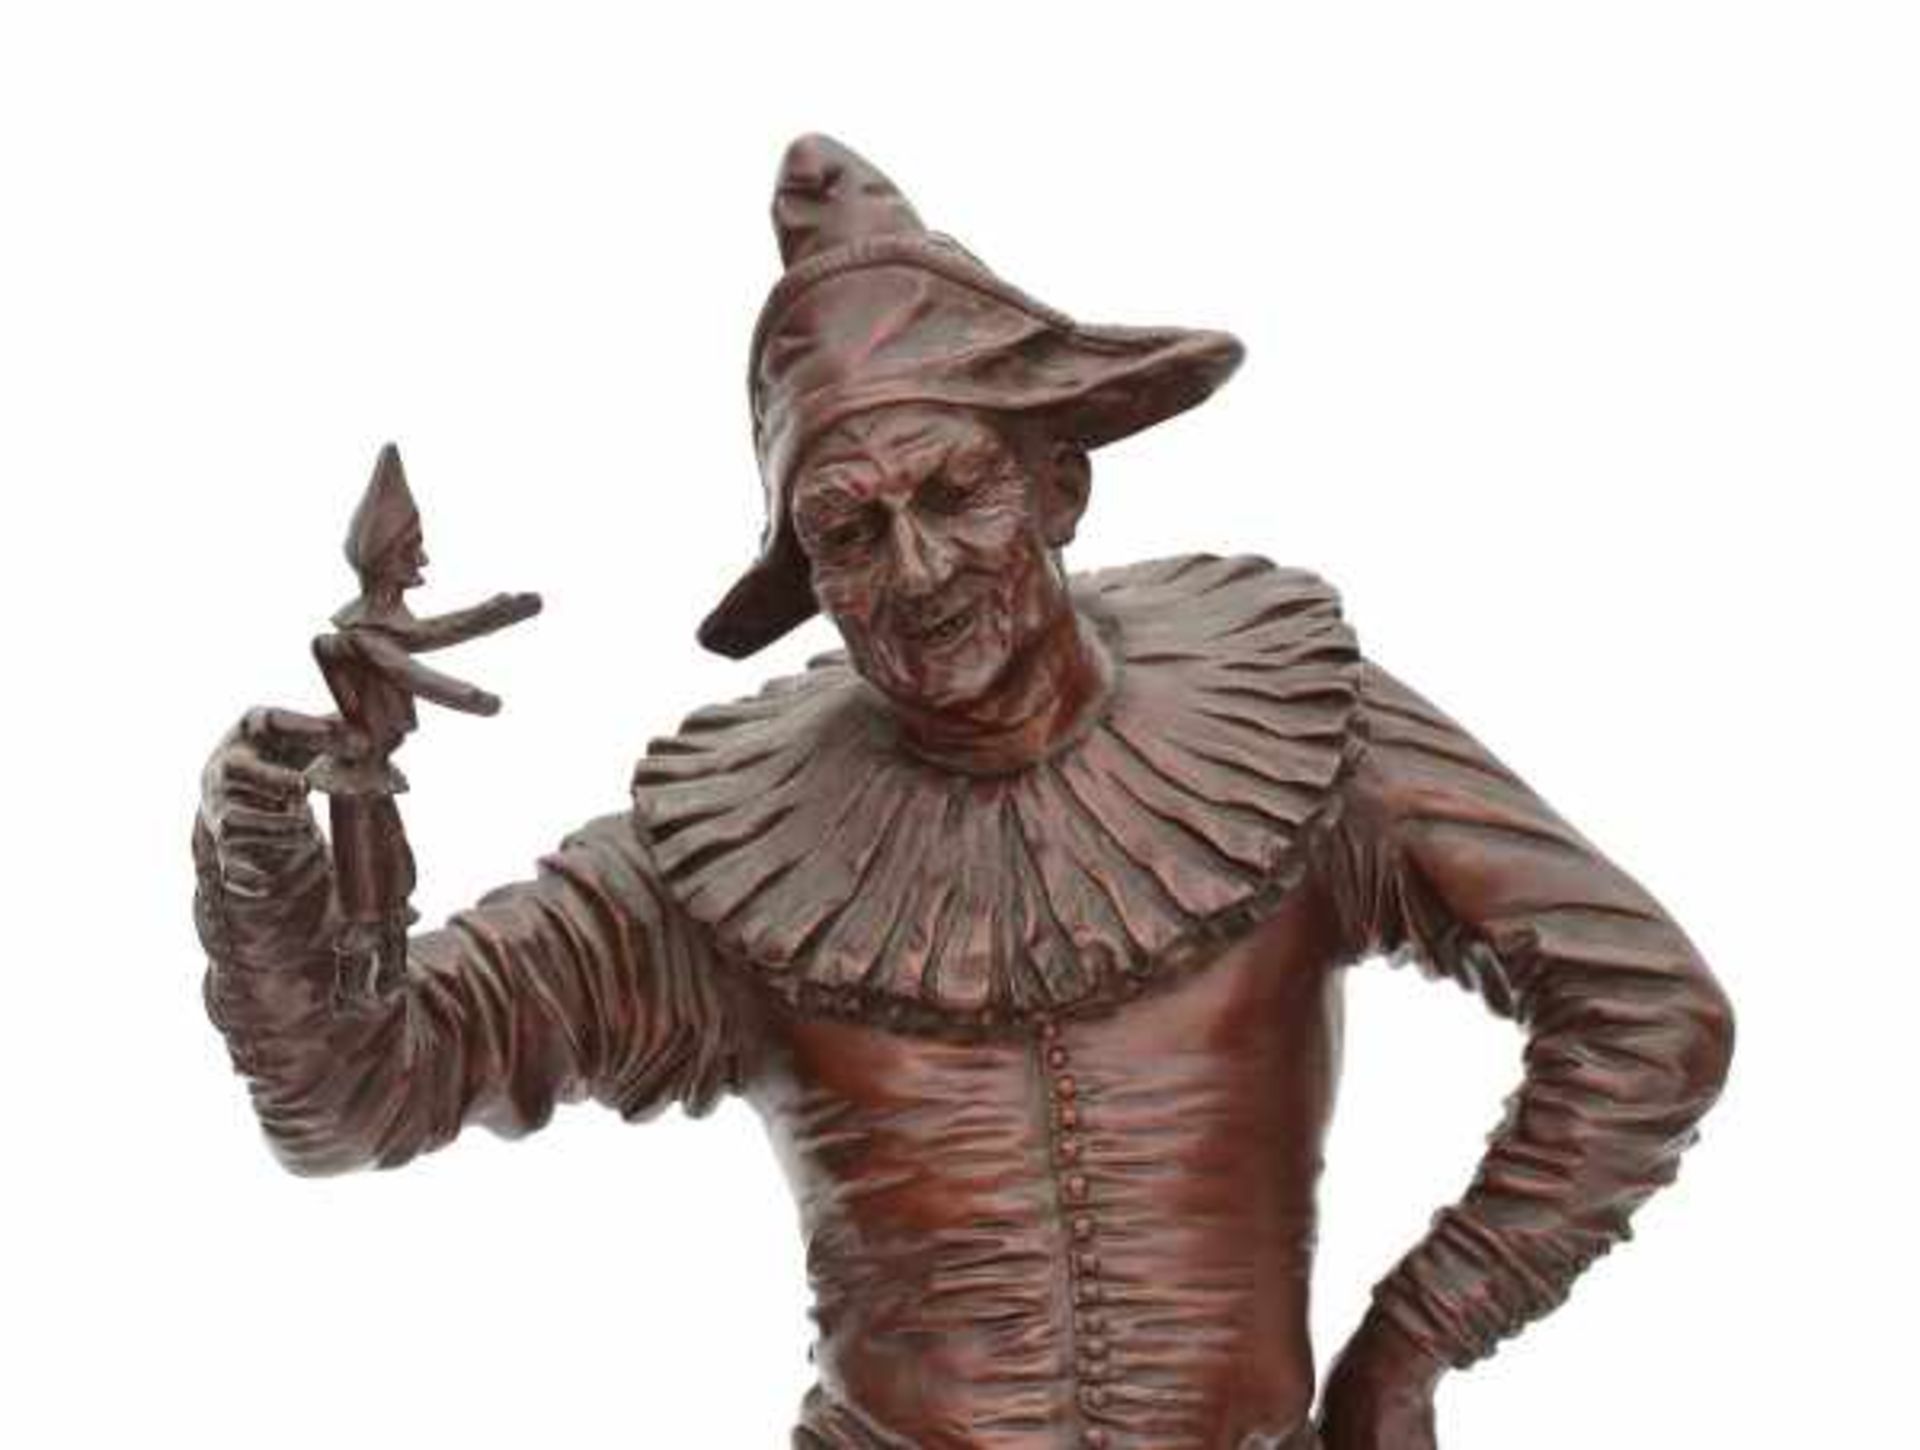 G. Gueyton (XIX)A bronze sculpture, a standing harlequin holding a marionette. Signed on the base.